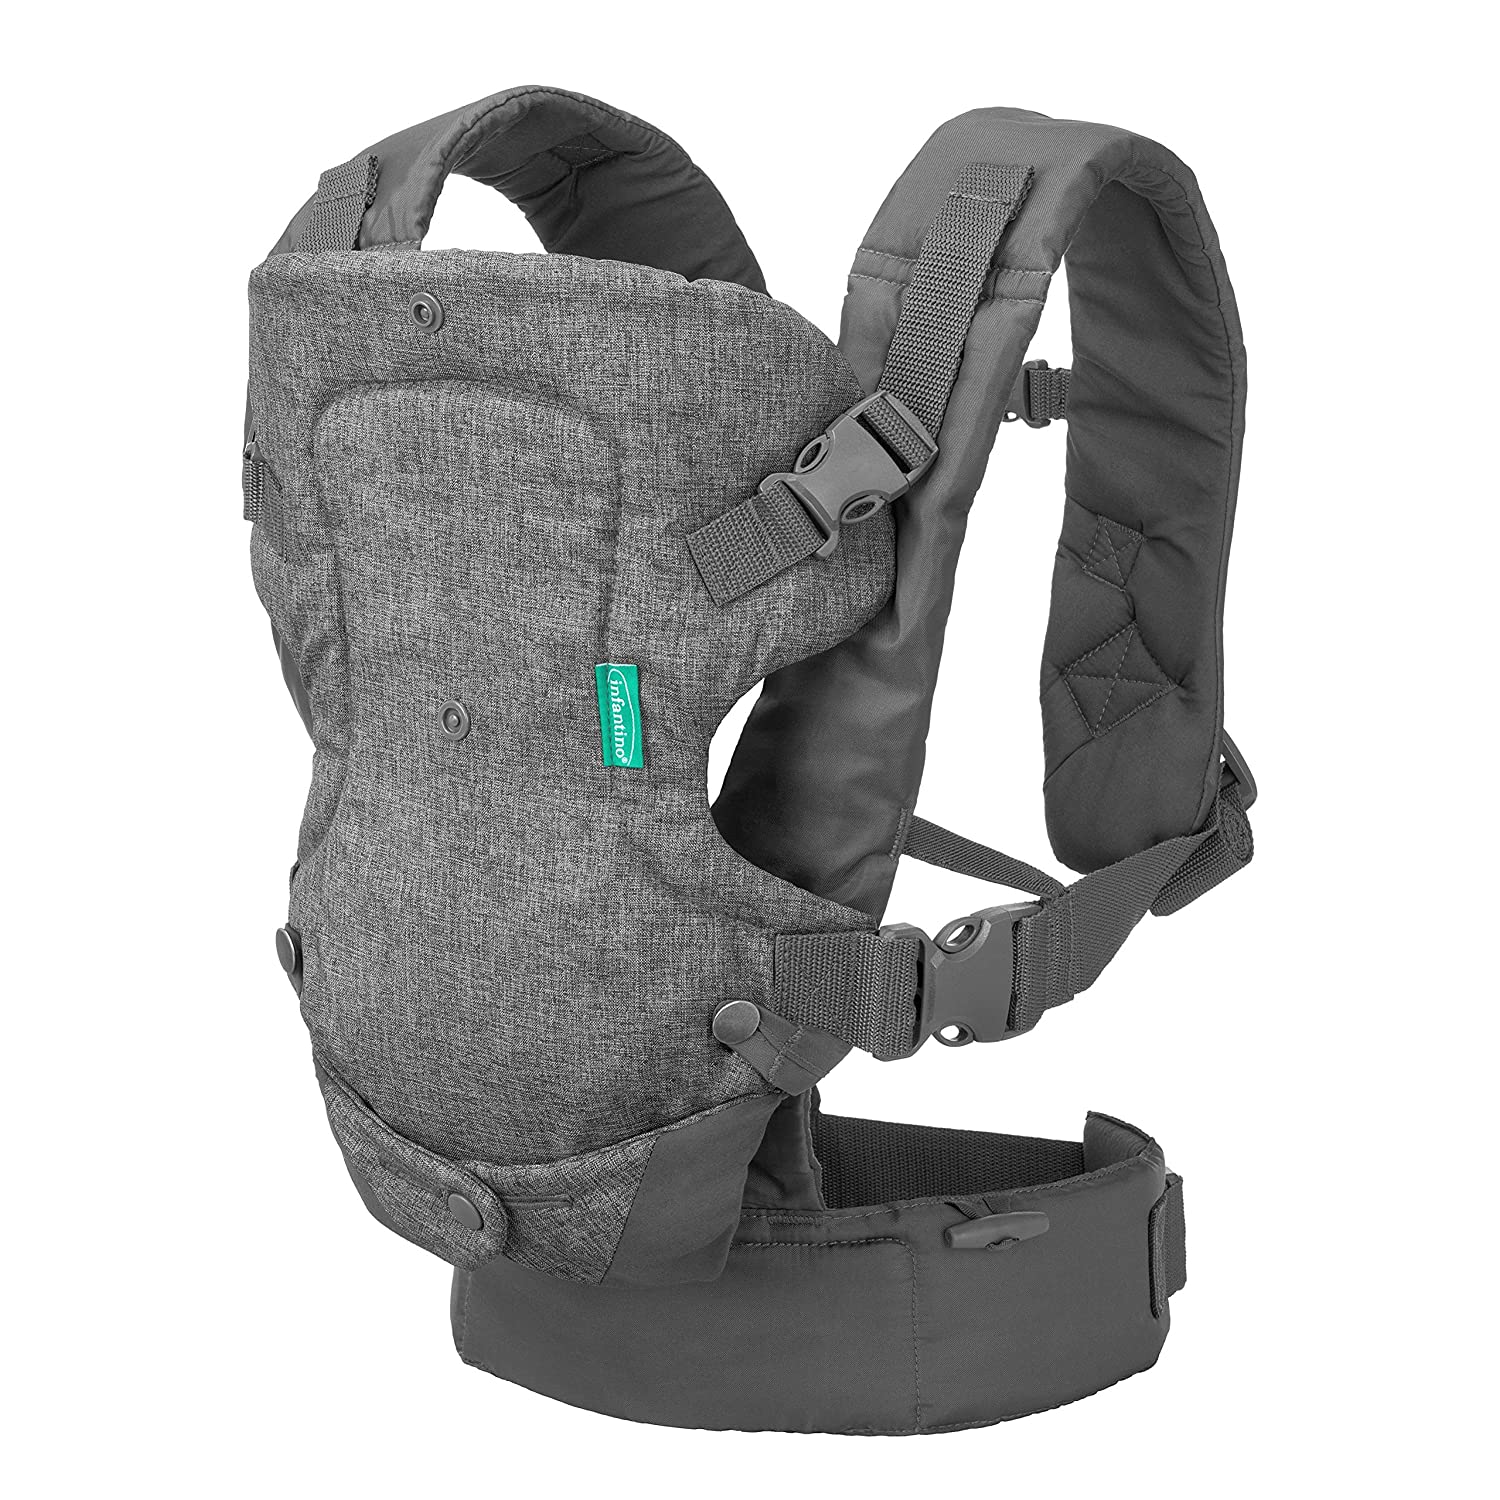 Infantino 4-in-1 Convertible Carrier